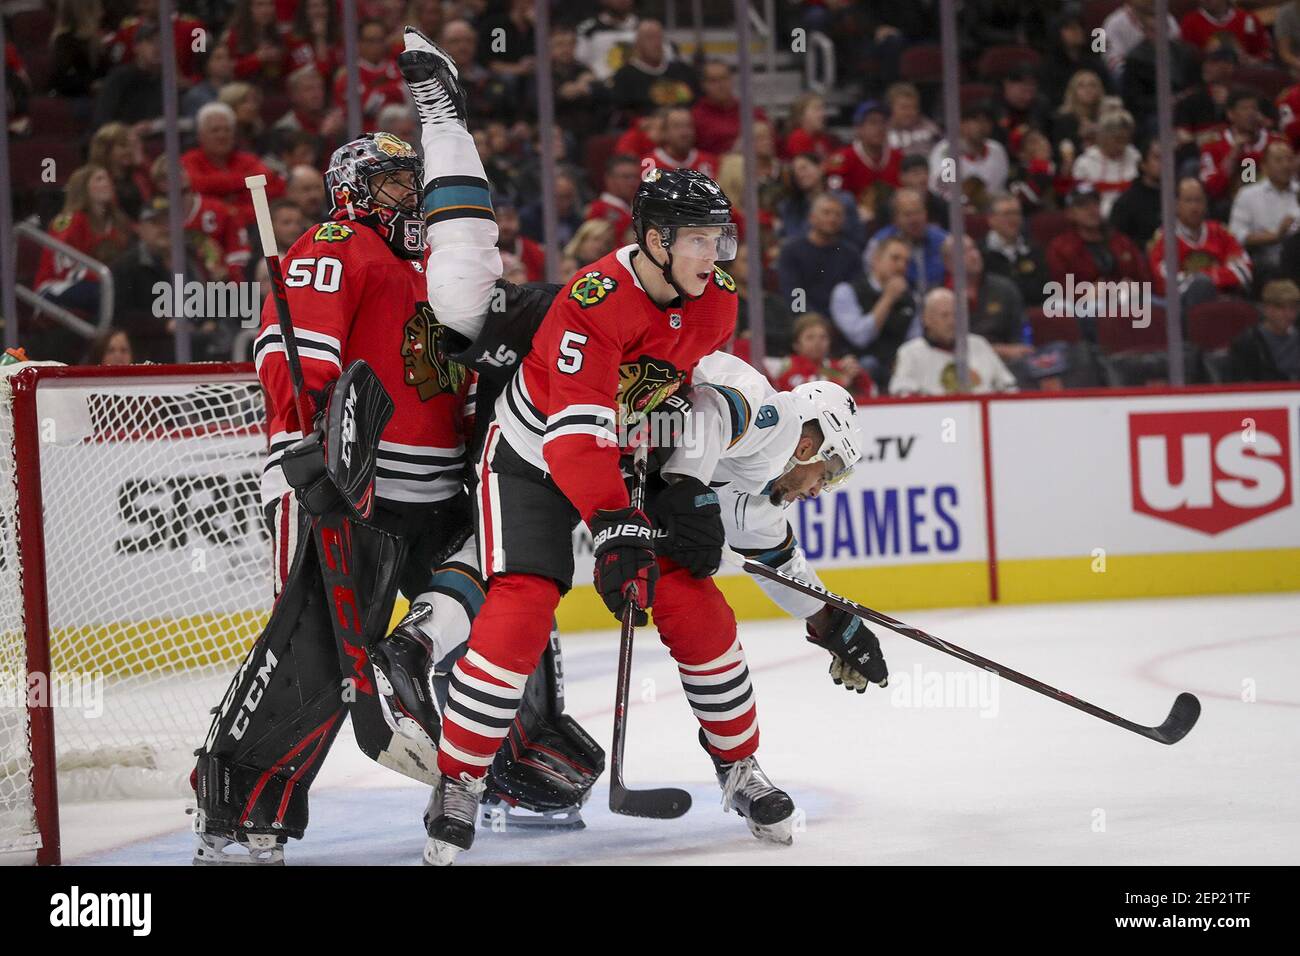 In this image from Oct. 10, 2019, San Jose Sharks left wing Evander Kane (9) falls over Chicago Blackhawks goaltender Corey Crawford (50) and Chicago Blackhawks defenseman Connor Murphy (5) during the second period of the Blackhawks home opener at the United Center in Chicago. During Monday night's win, Crawford made 27 saves. (Photo by Armando L. Sanchez/Chicago Tribune/TNS/Sipa USA) Stock Photo